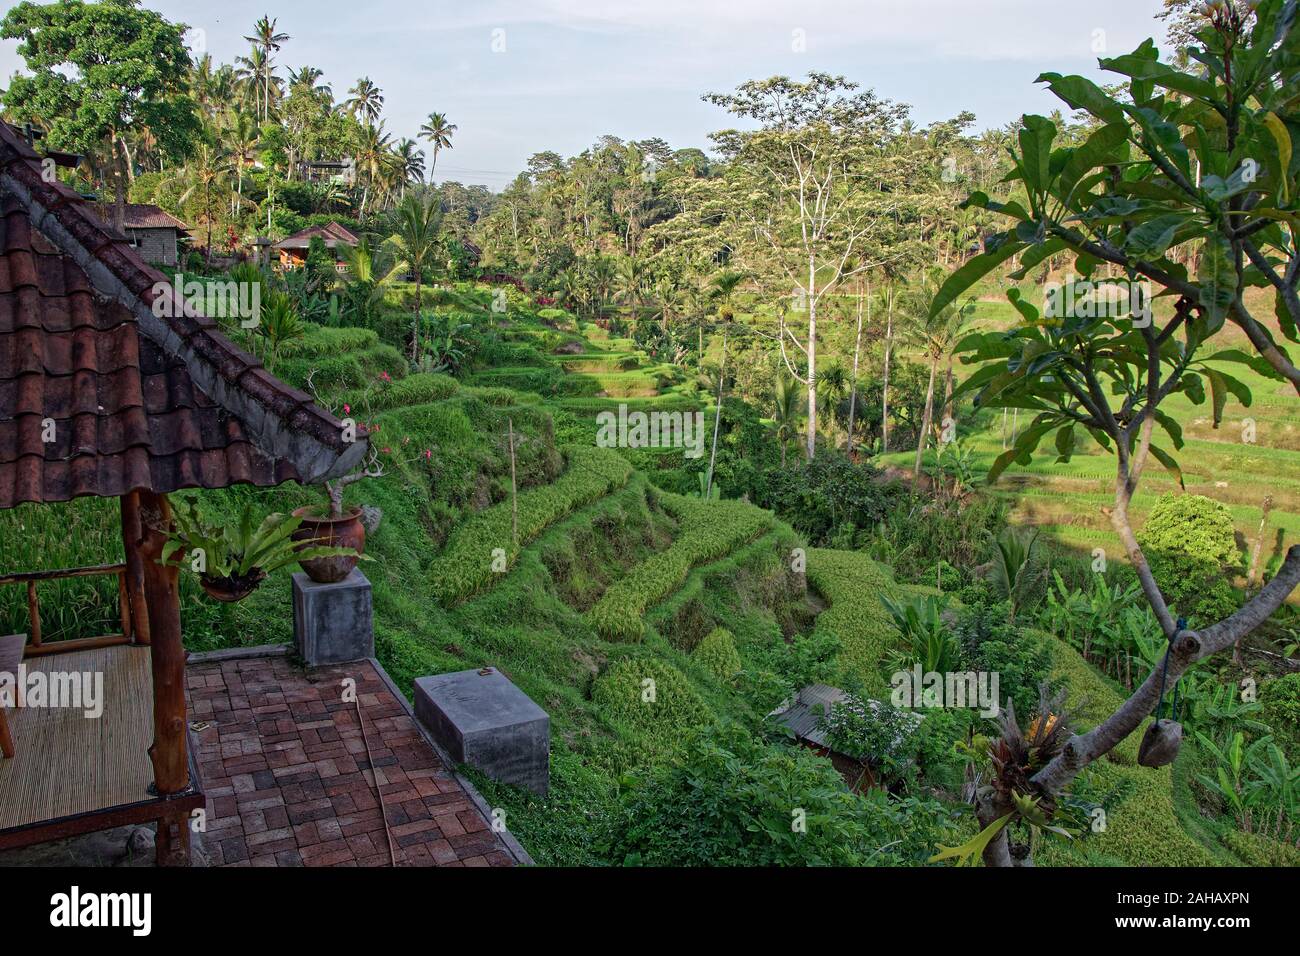 Tegallalang Rice terrace viepoint in Bali, Indonesia Stock Photo